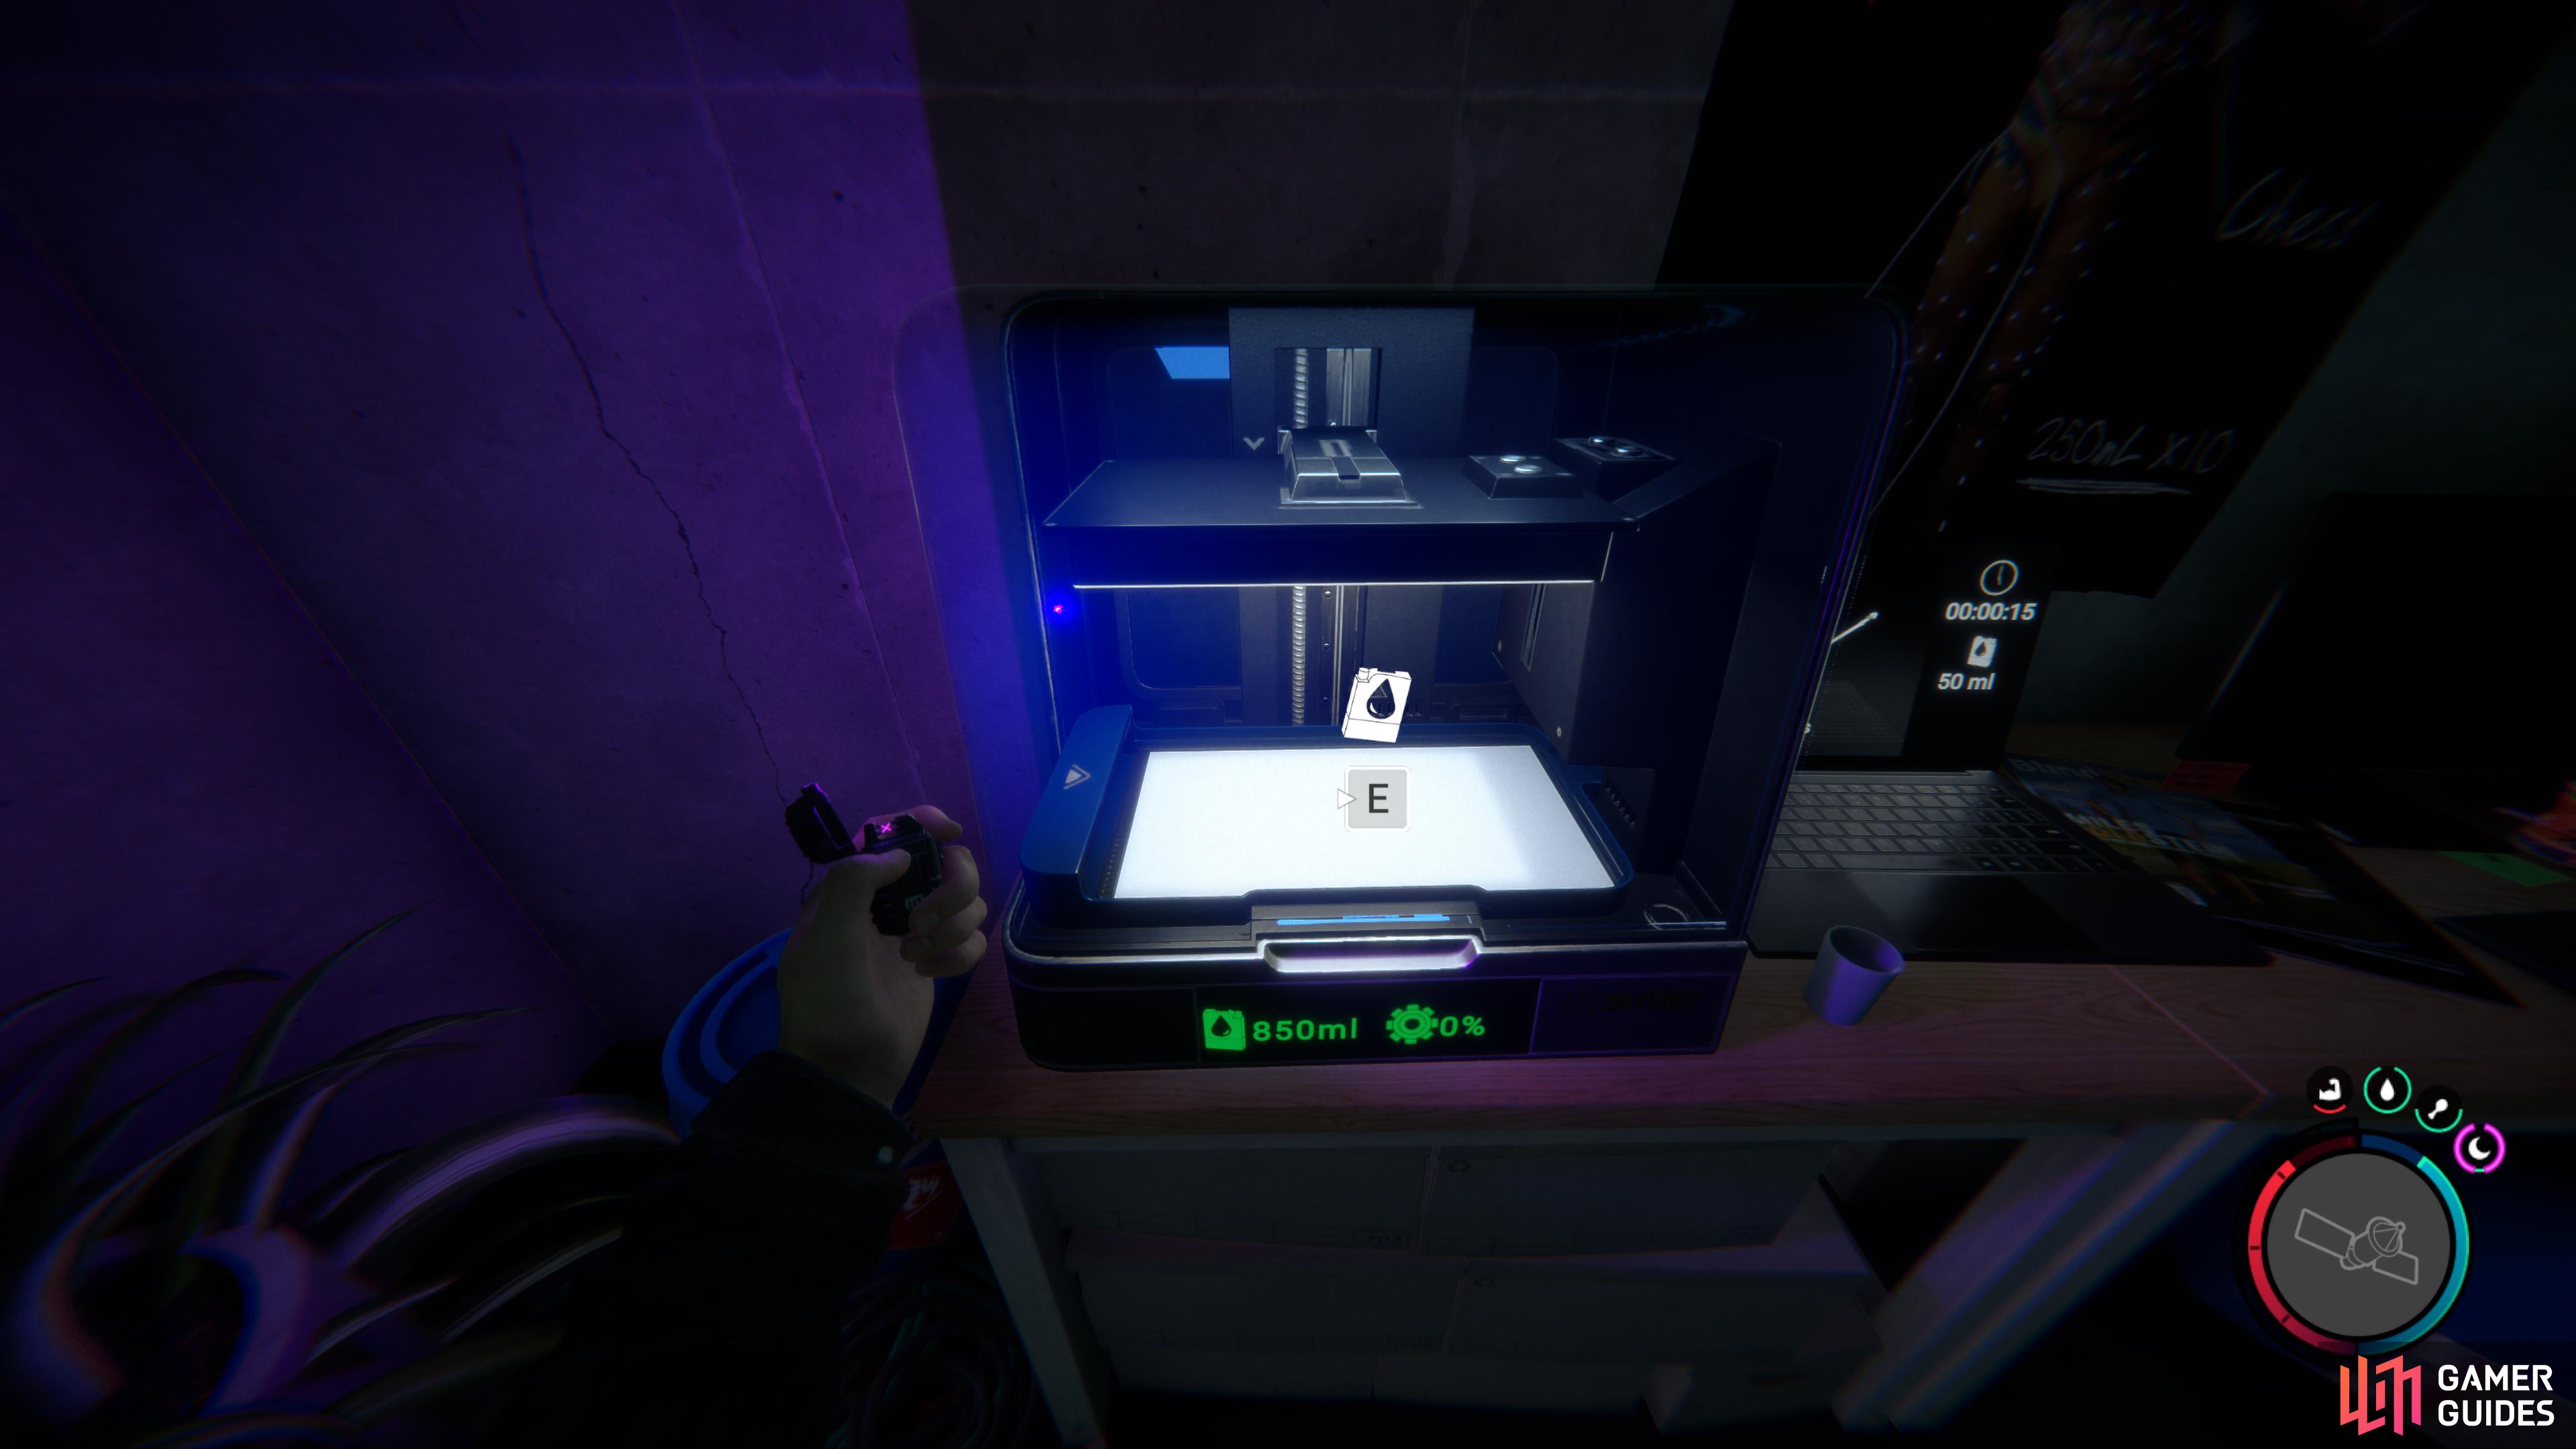 The 3D Printer is a new feature in Sons of the Forest where you can print various items in the game.